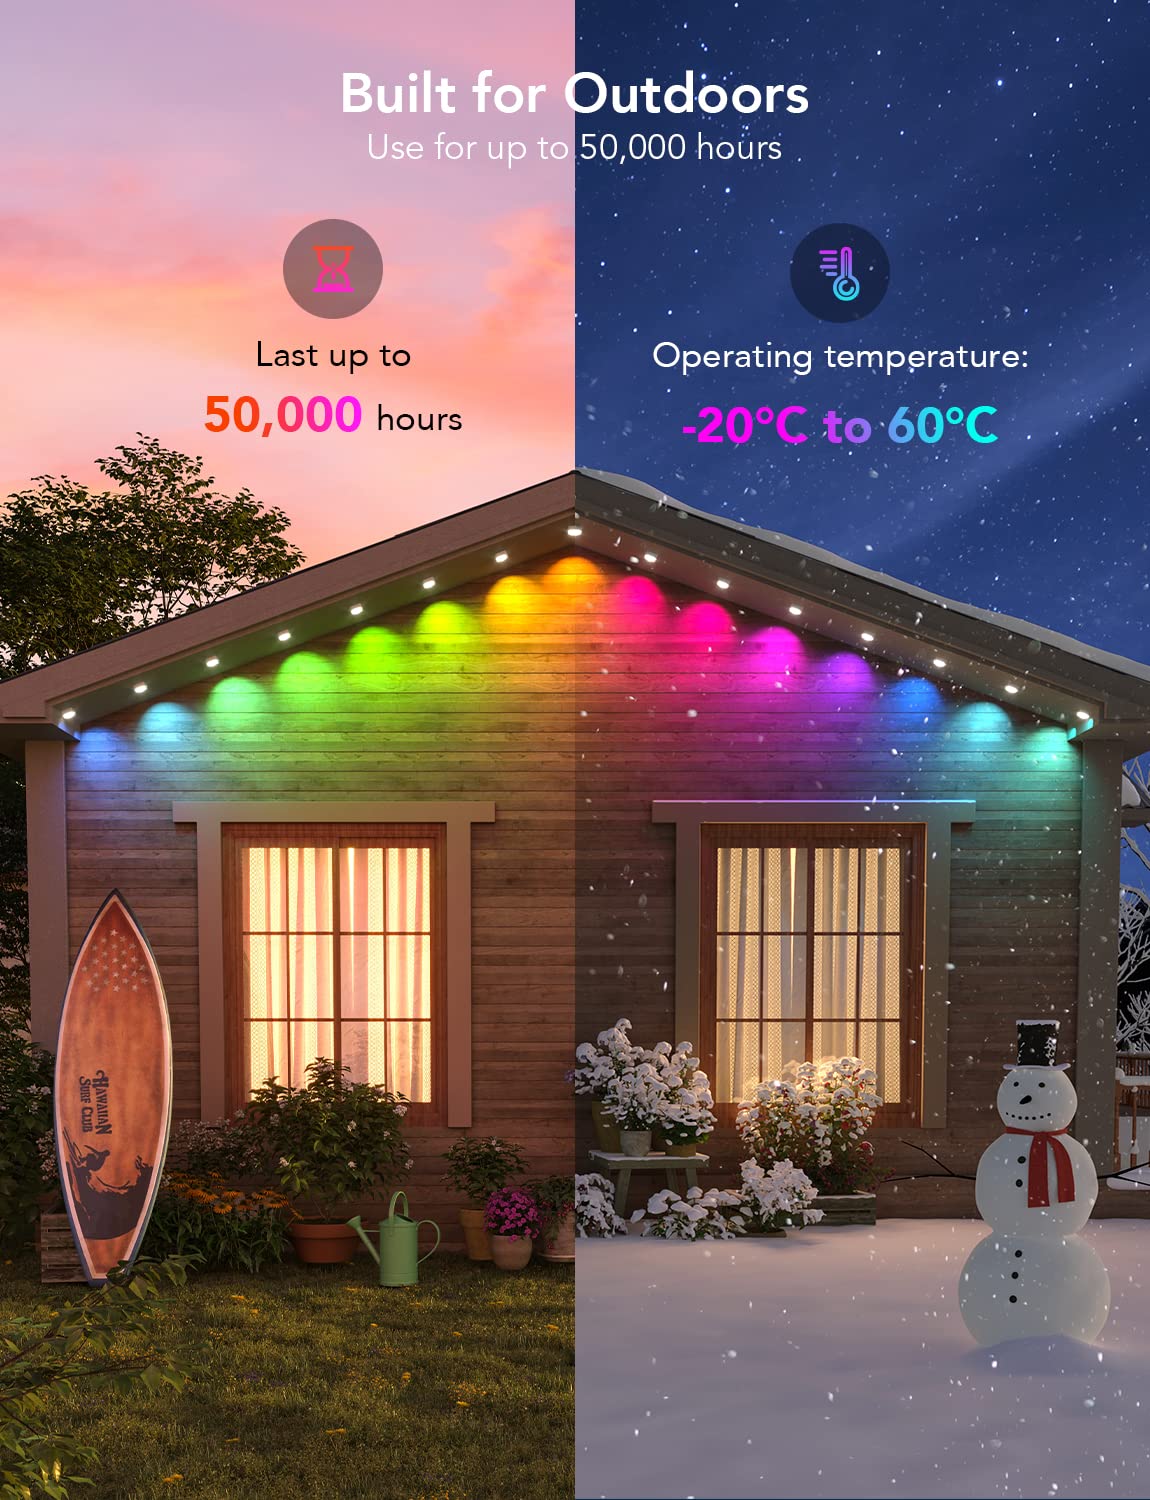 Govee Permanent Outdoor Lights, Smart RGBIC Outdoor Lights with 73 Scene Modes, 100ft with 72 LED Eaves Lights IP67 Waterproof for Party, Game Day, Daily Lighting, Work with Alexa, Google Assistant